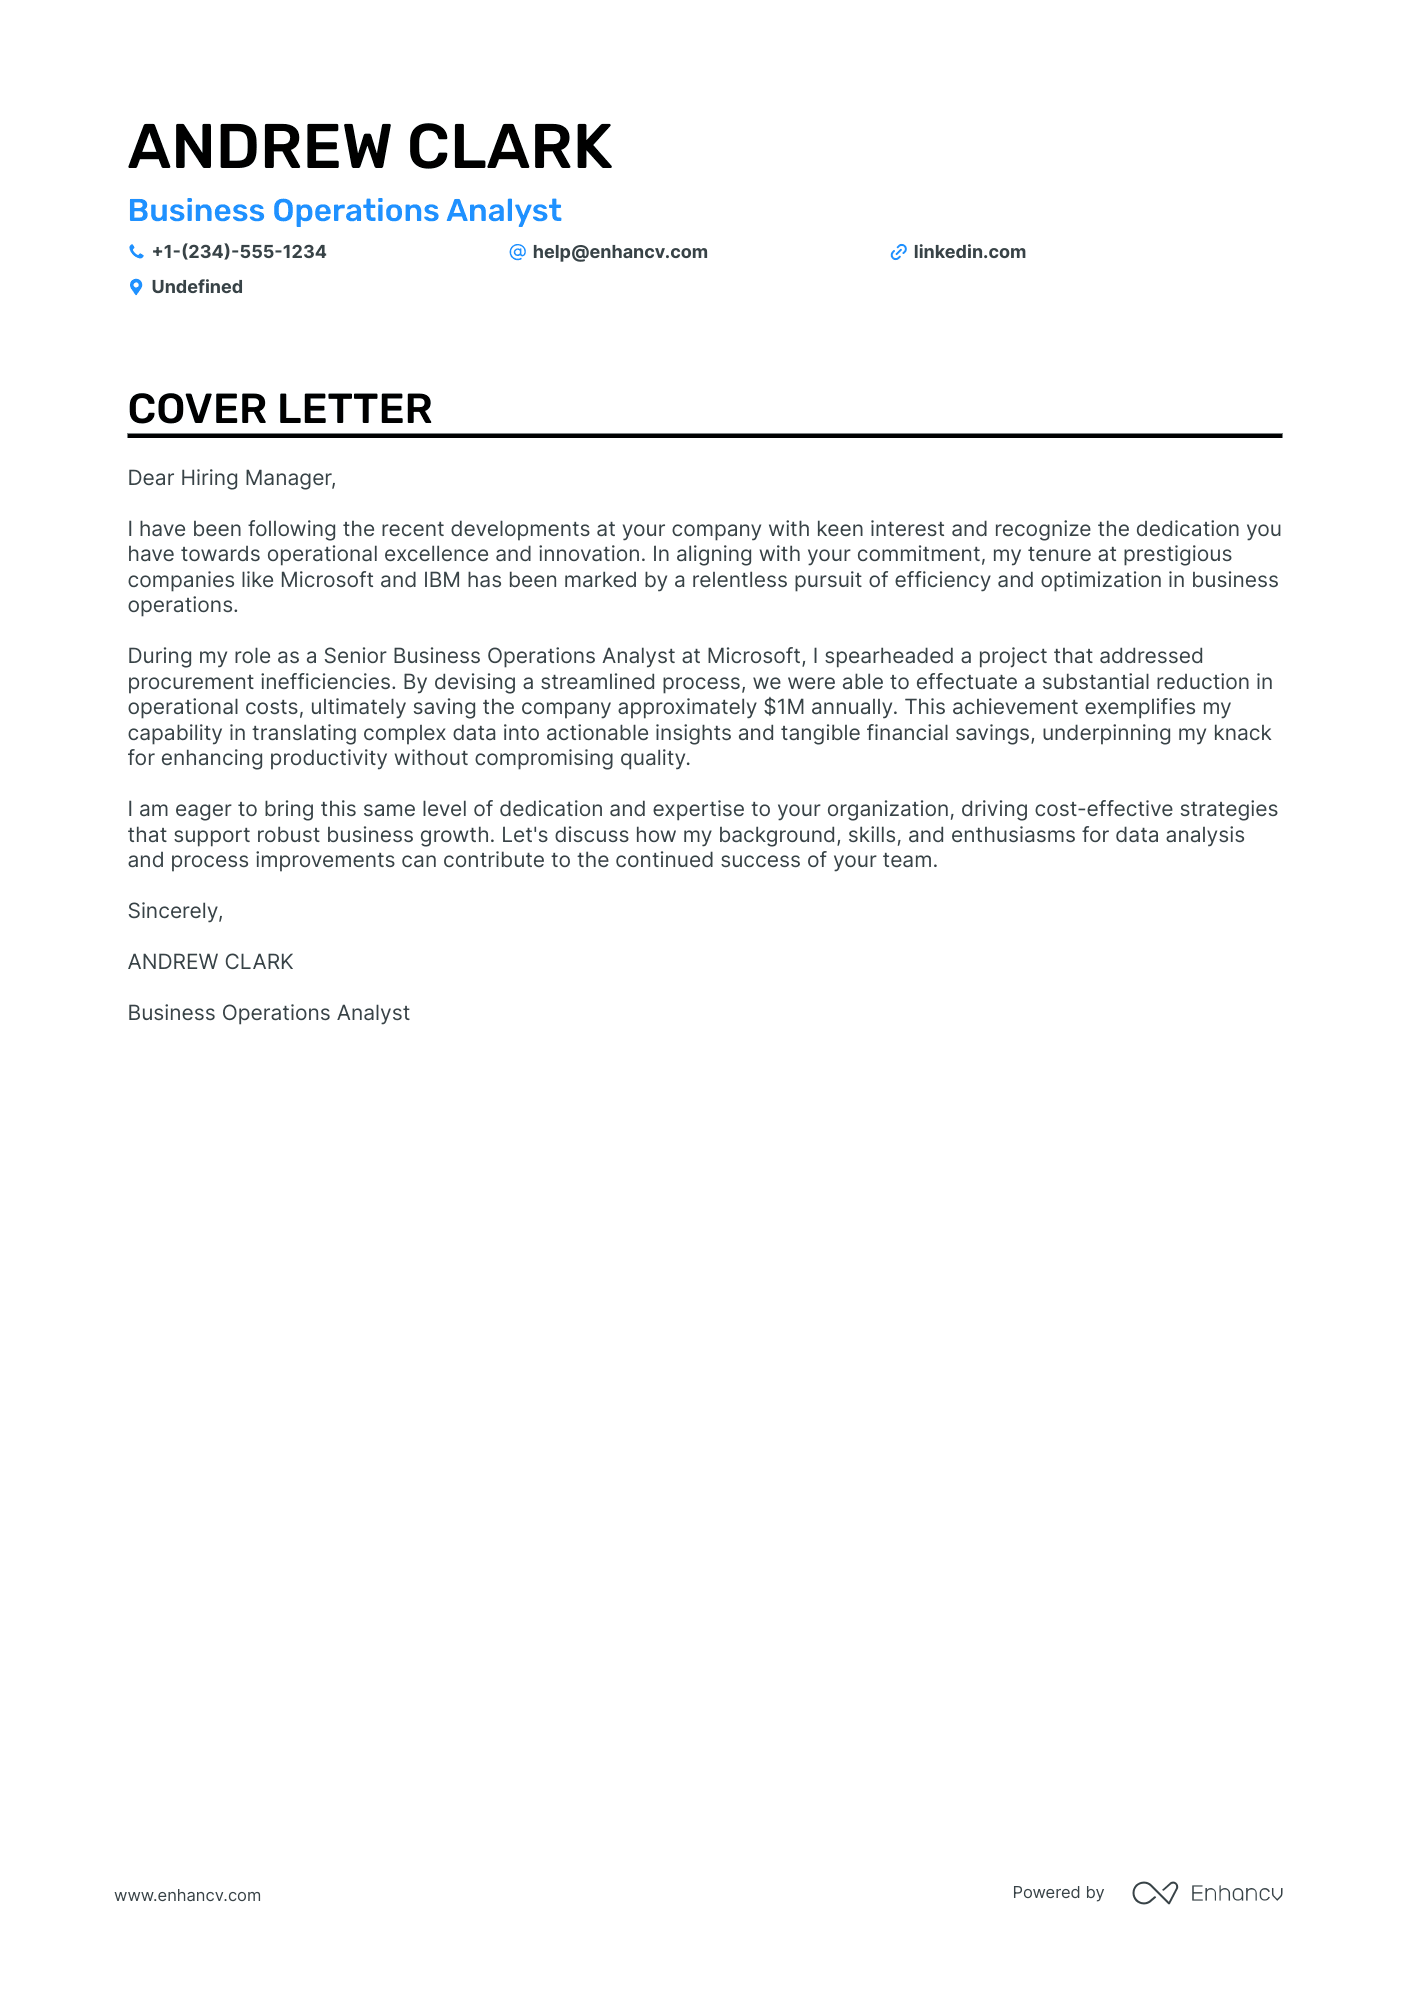 Business Operations Analyst cover letter